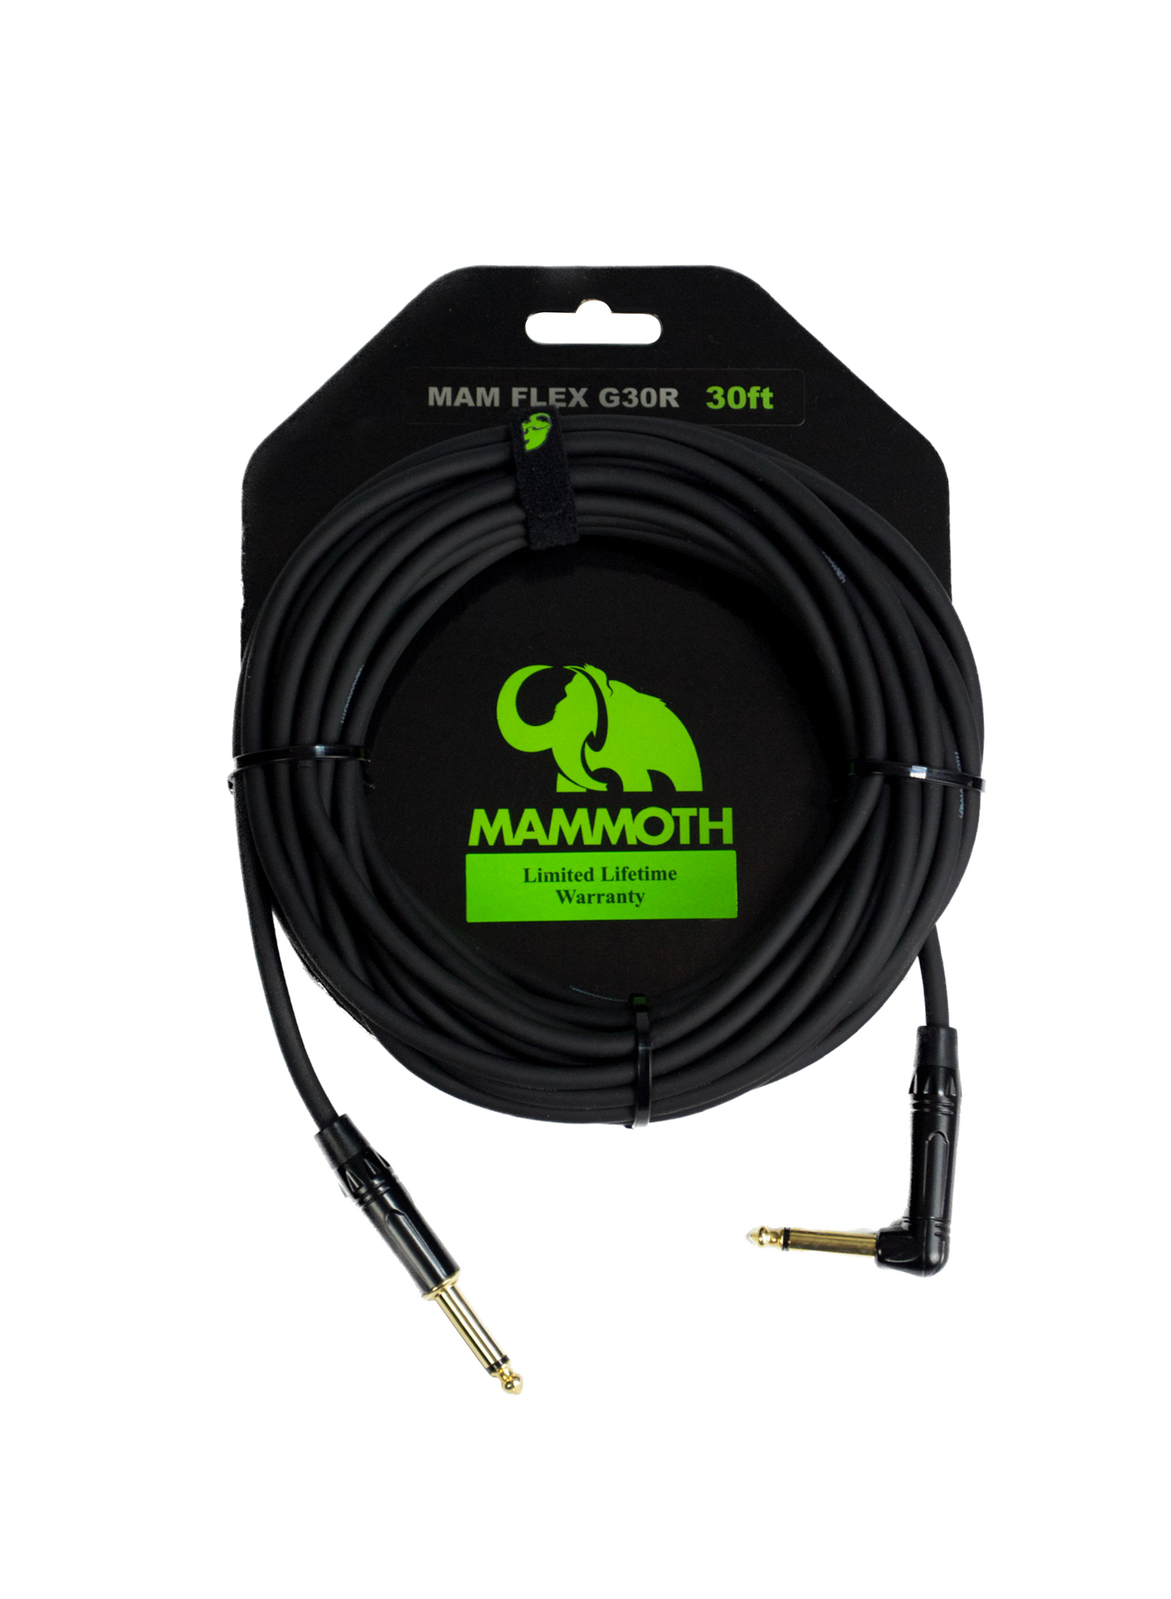 Mammoth Flex G30R, 30ft Instrument Cable, Right Angle Jack to Straight Jack